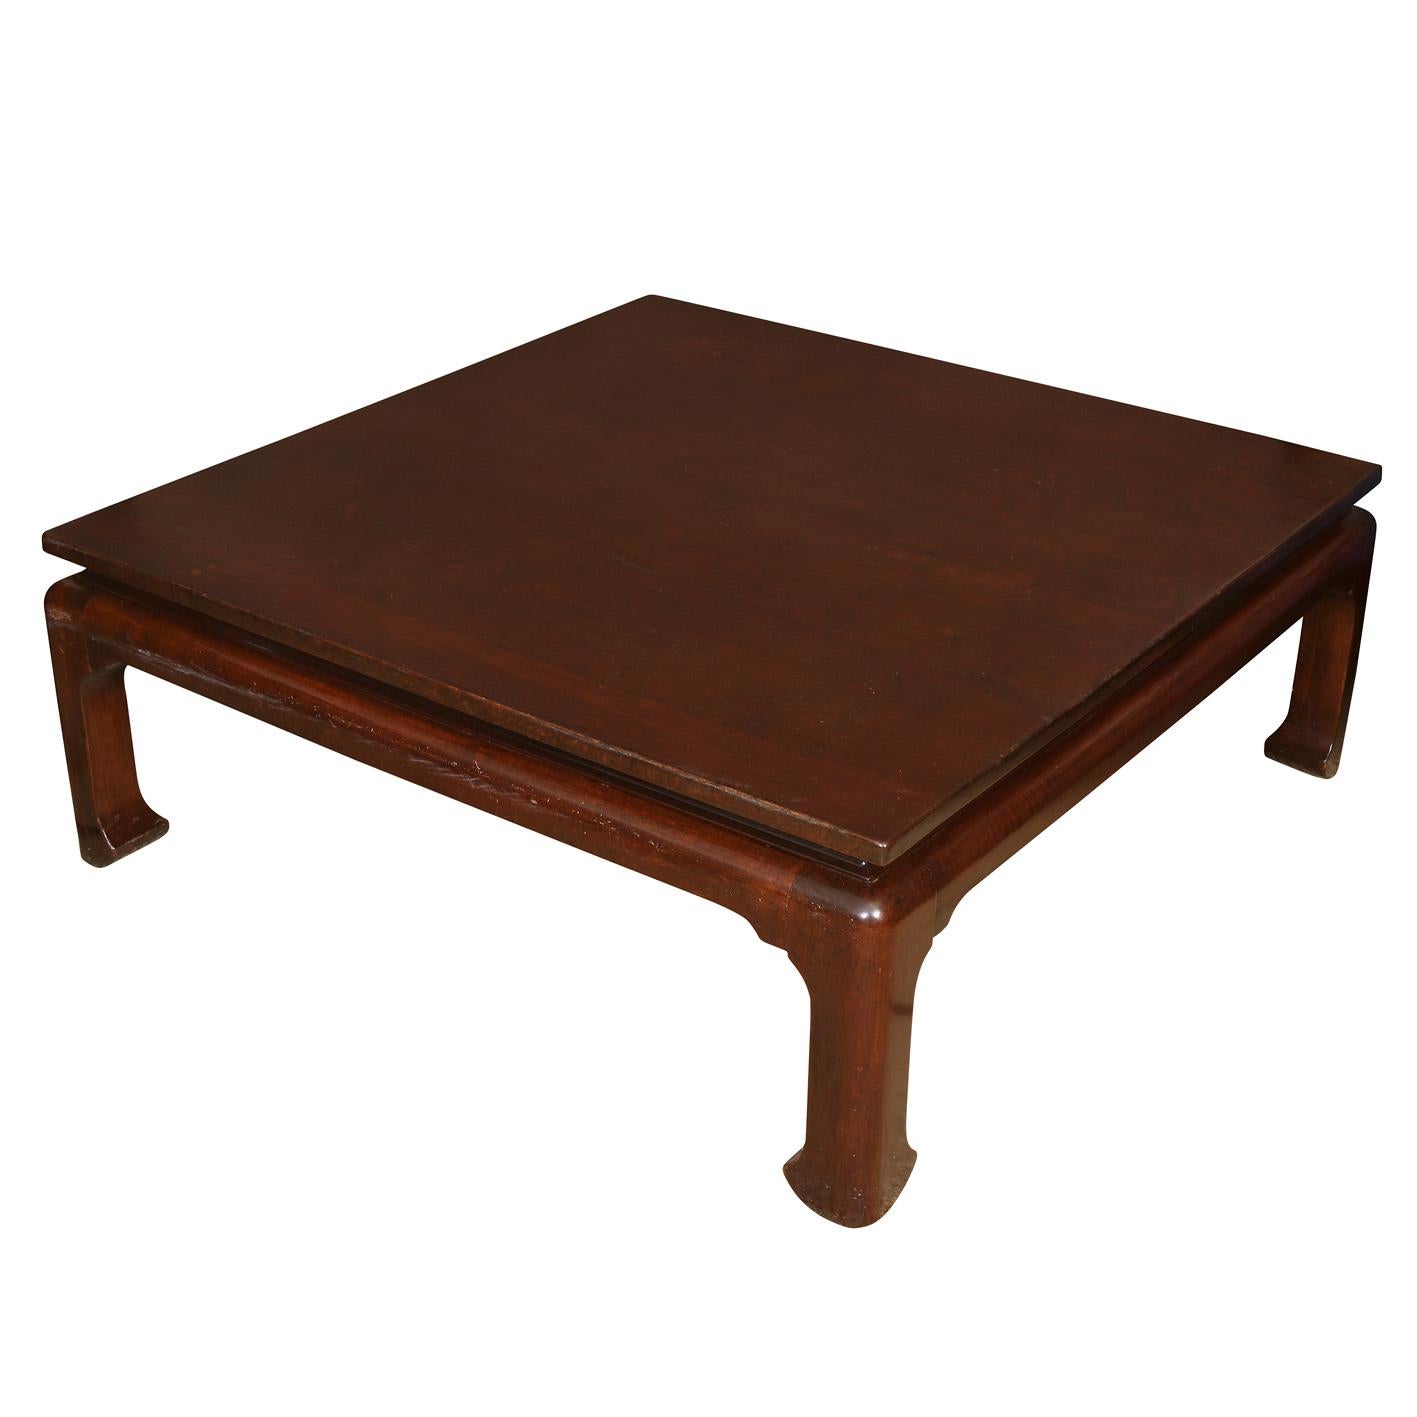 A vintage Asian style square coffee table in polished dark wood with Ming shaped legs and feet.